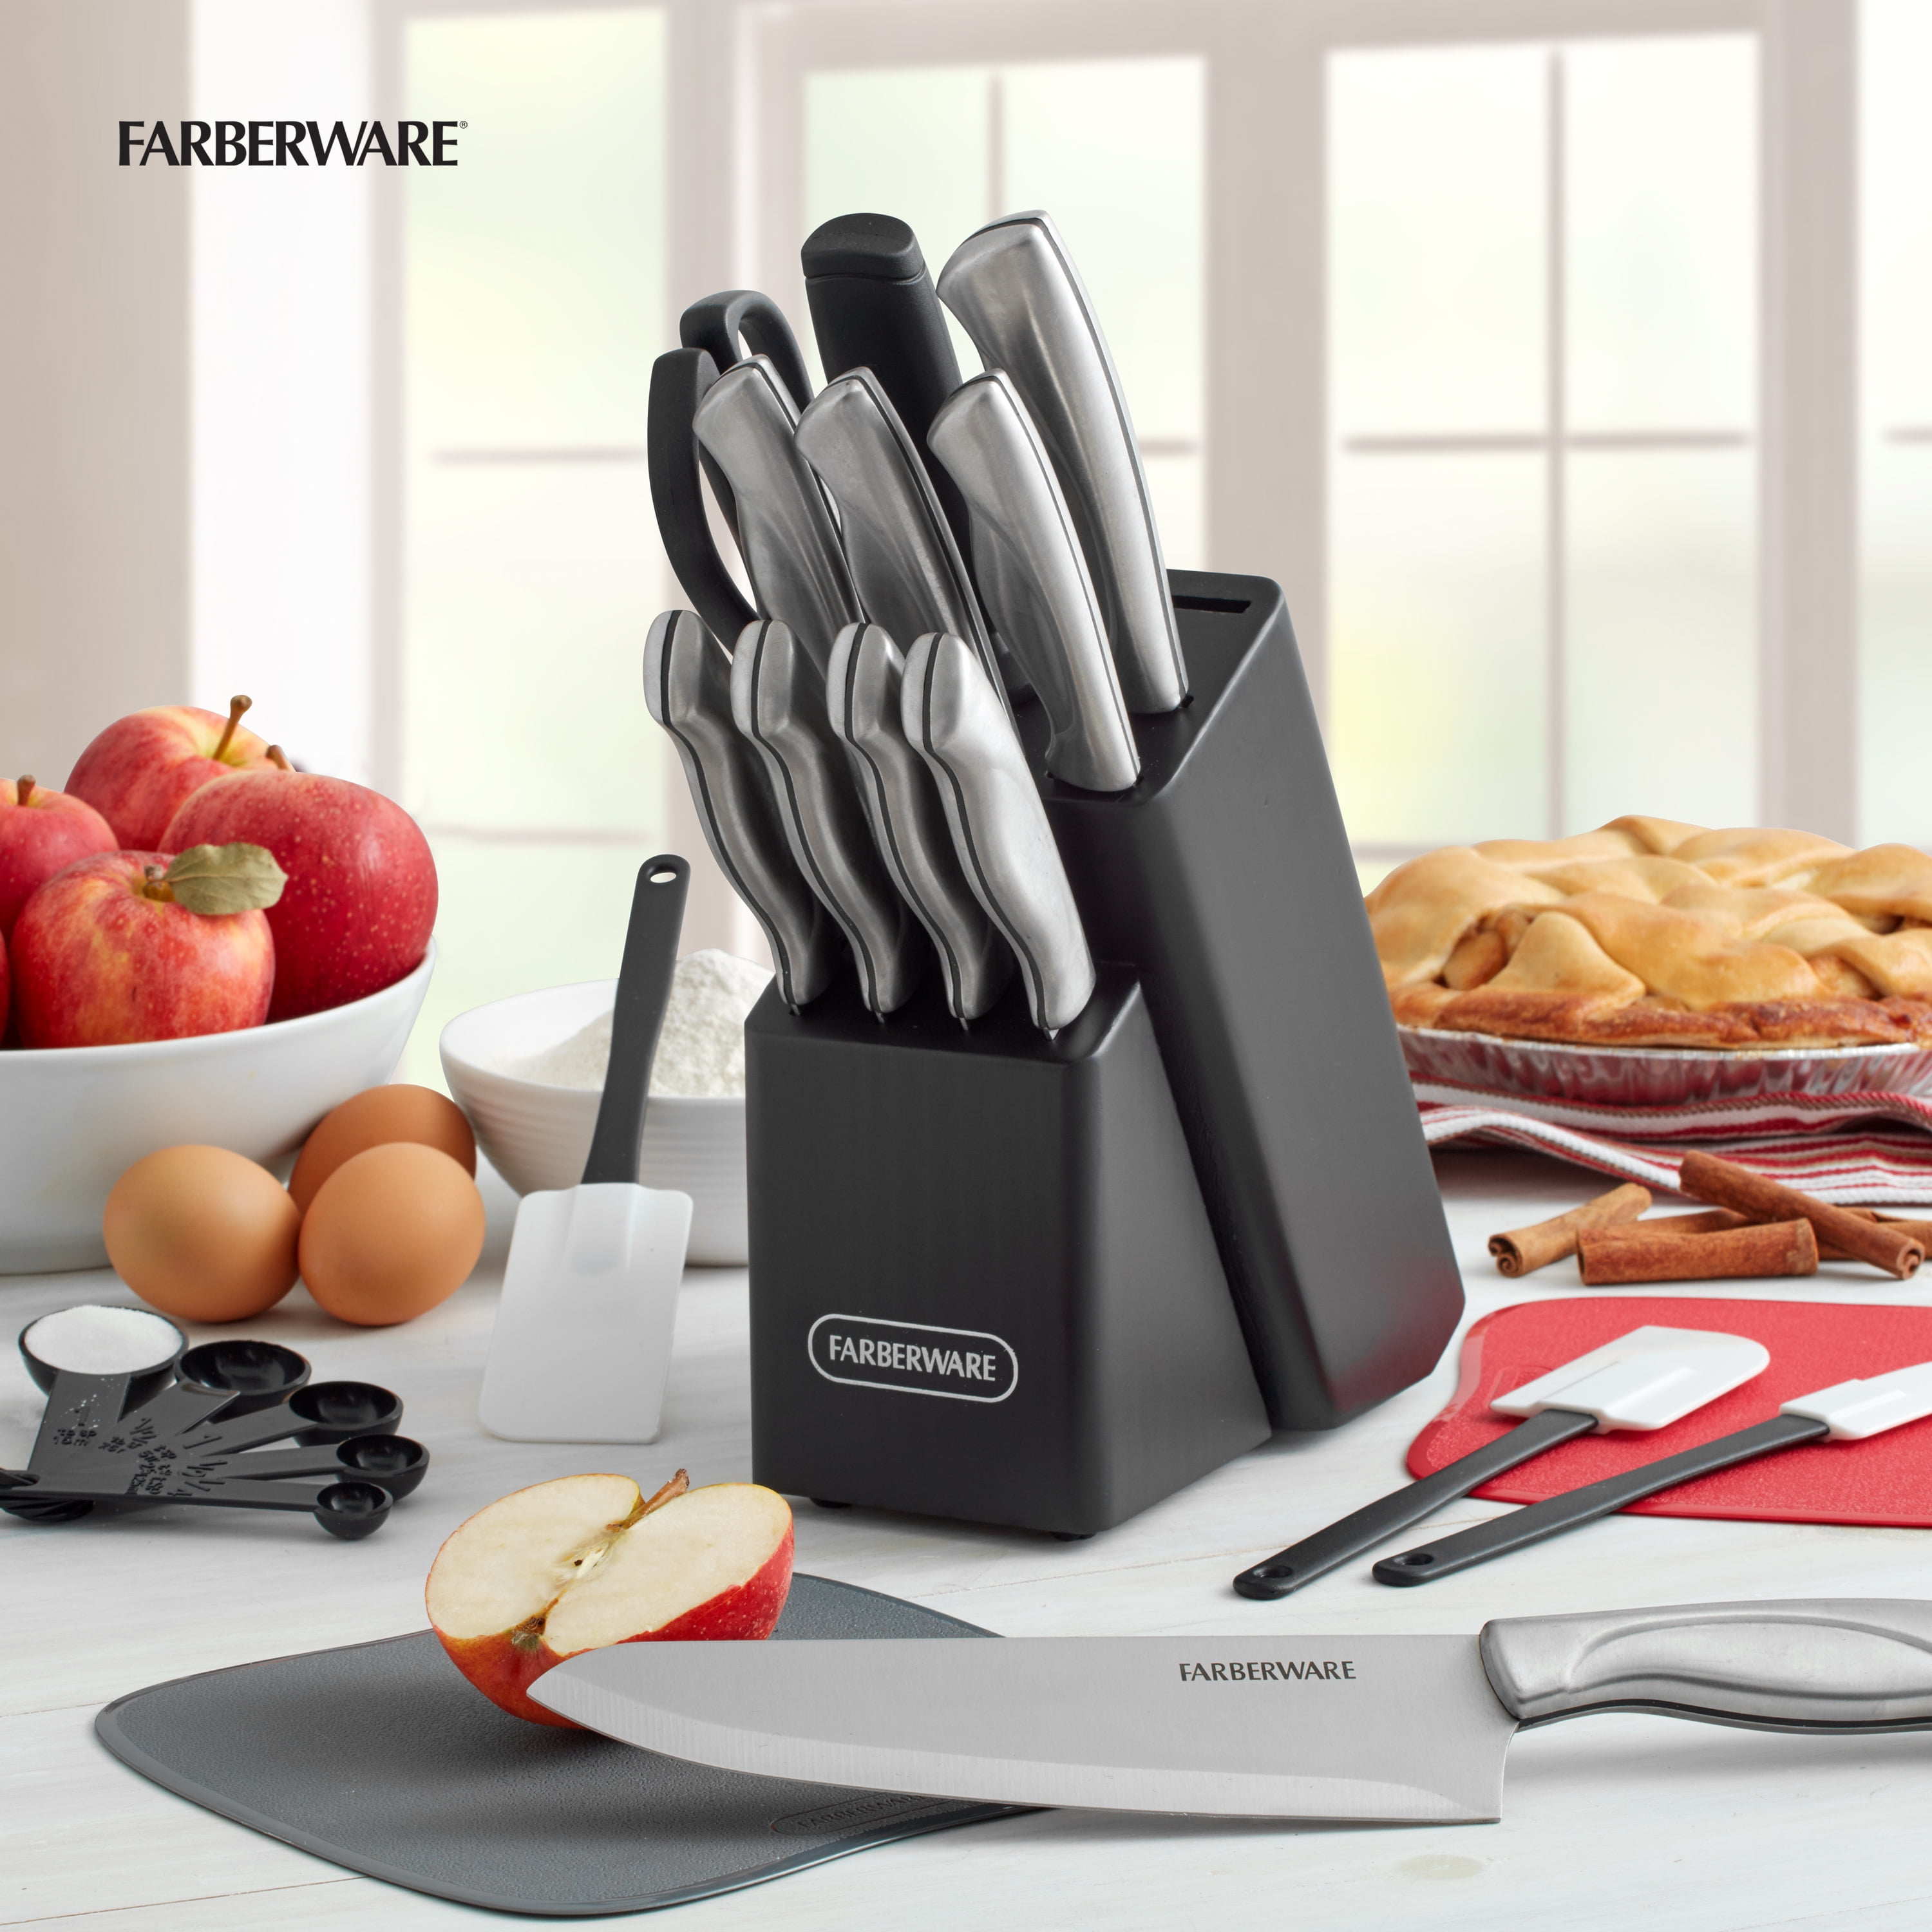 Farberware Classic 22-piece Stamped Stainless Steel Cutlery and Utensil Set - 2